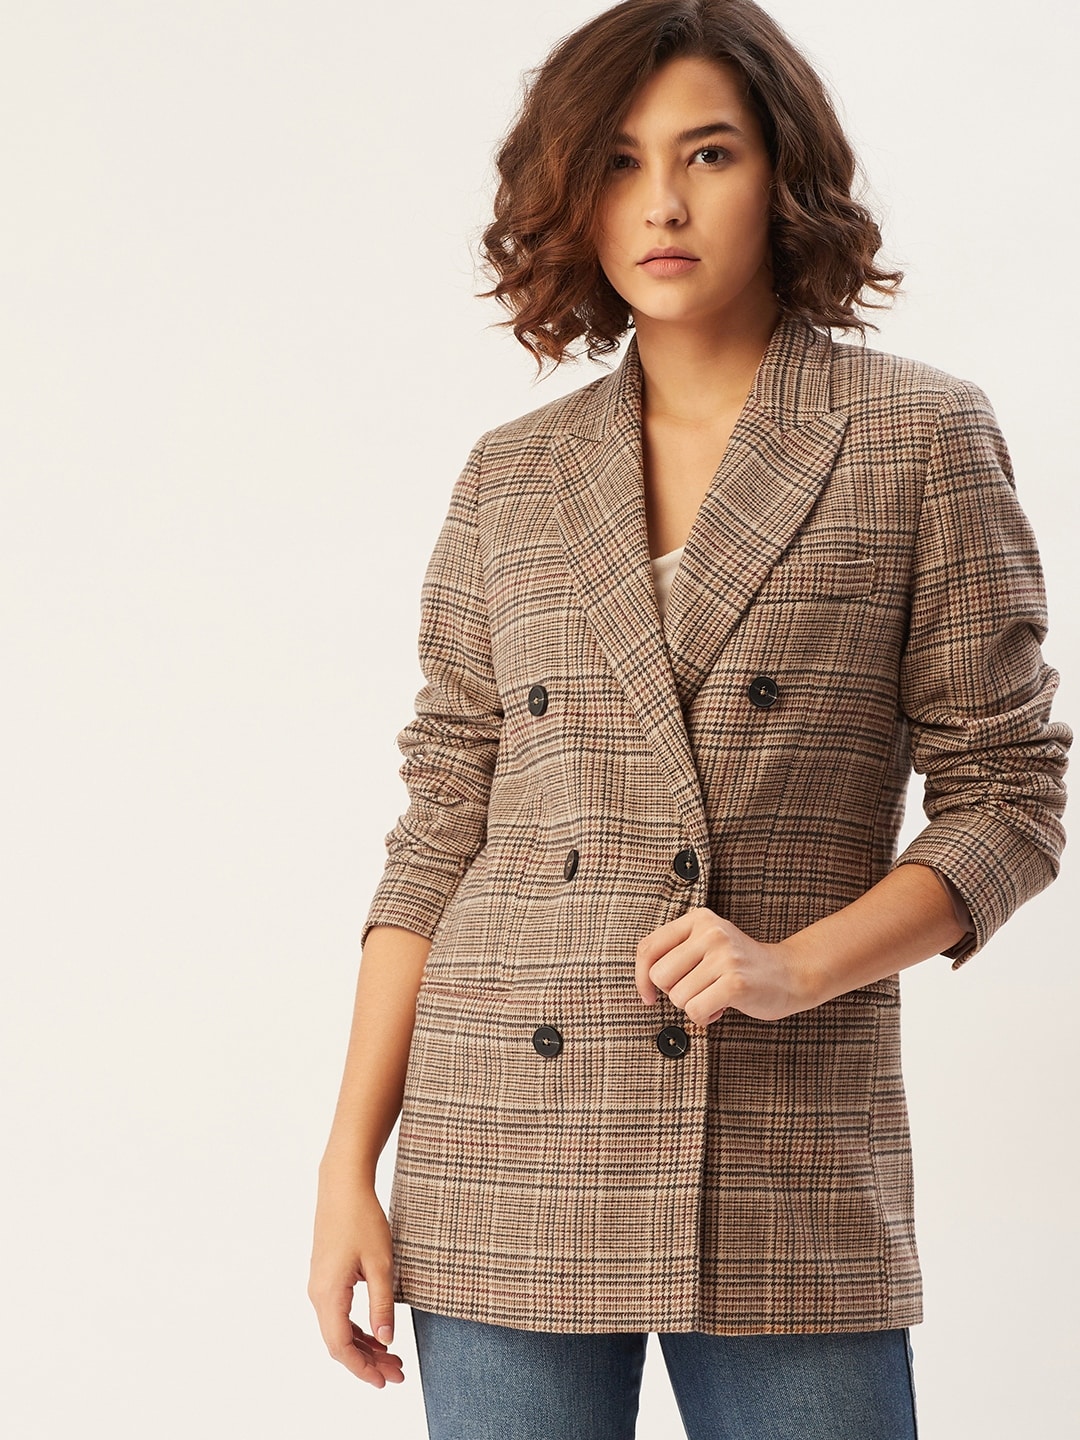 MANGO Women Beige & Black Checked Sustainable Single-Breasted Blazer Price in India